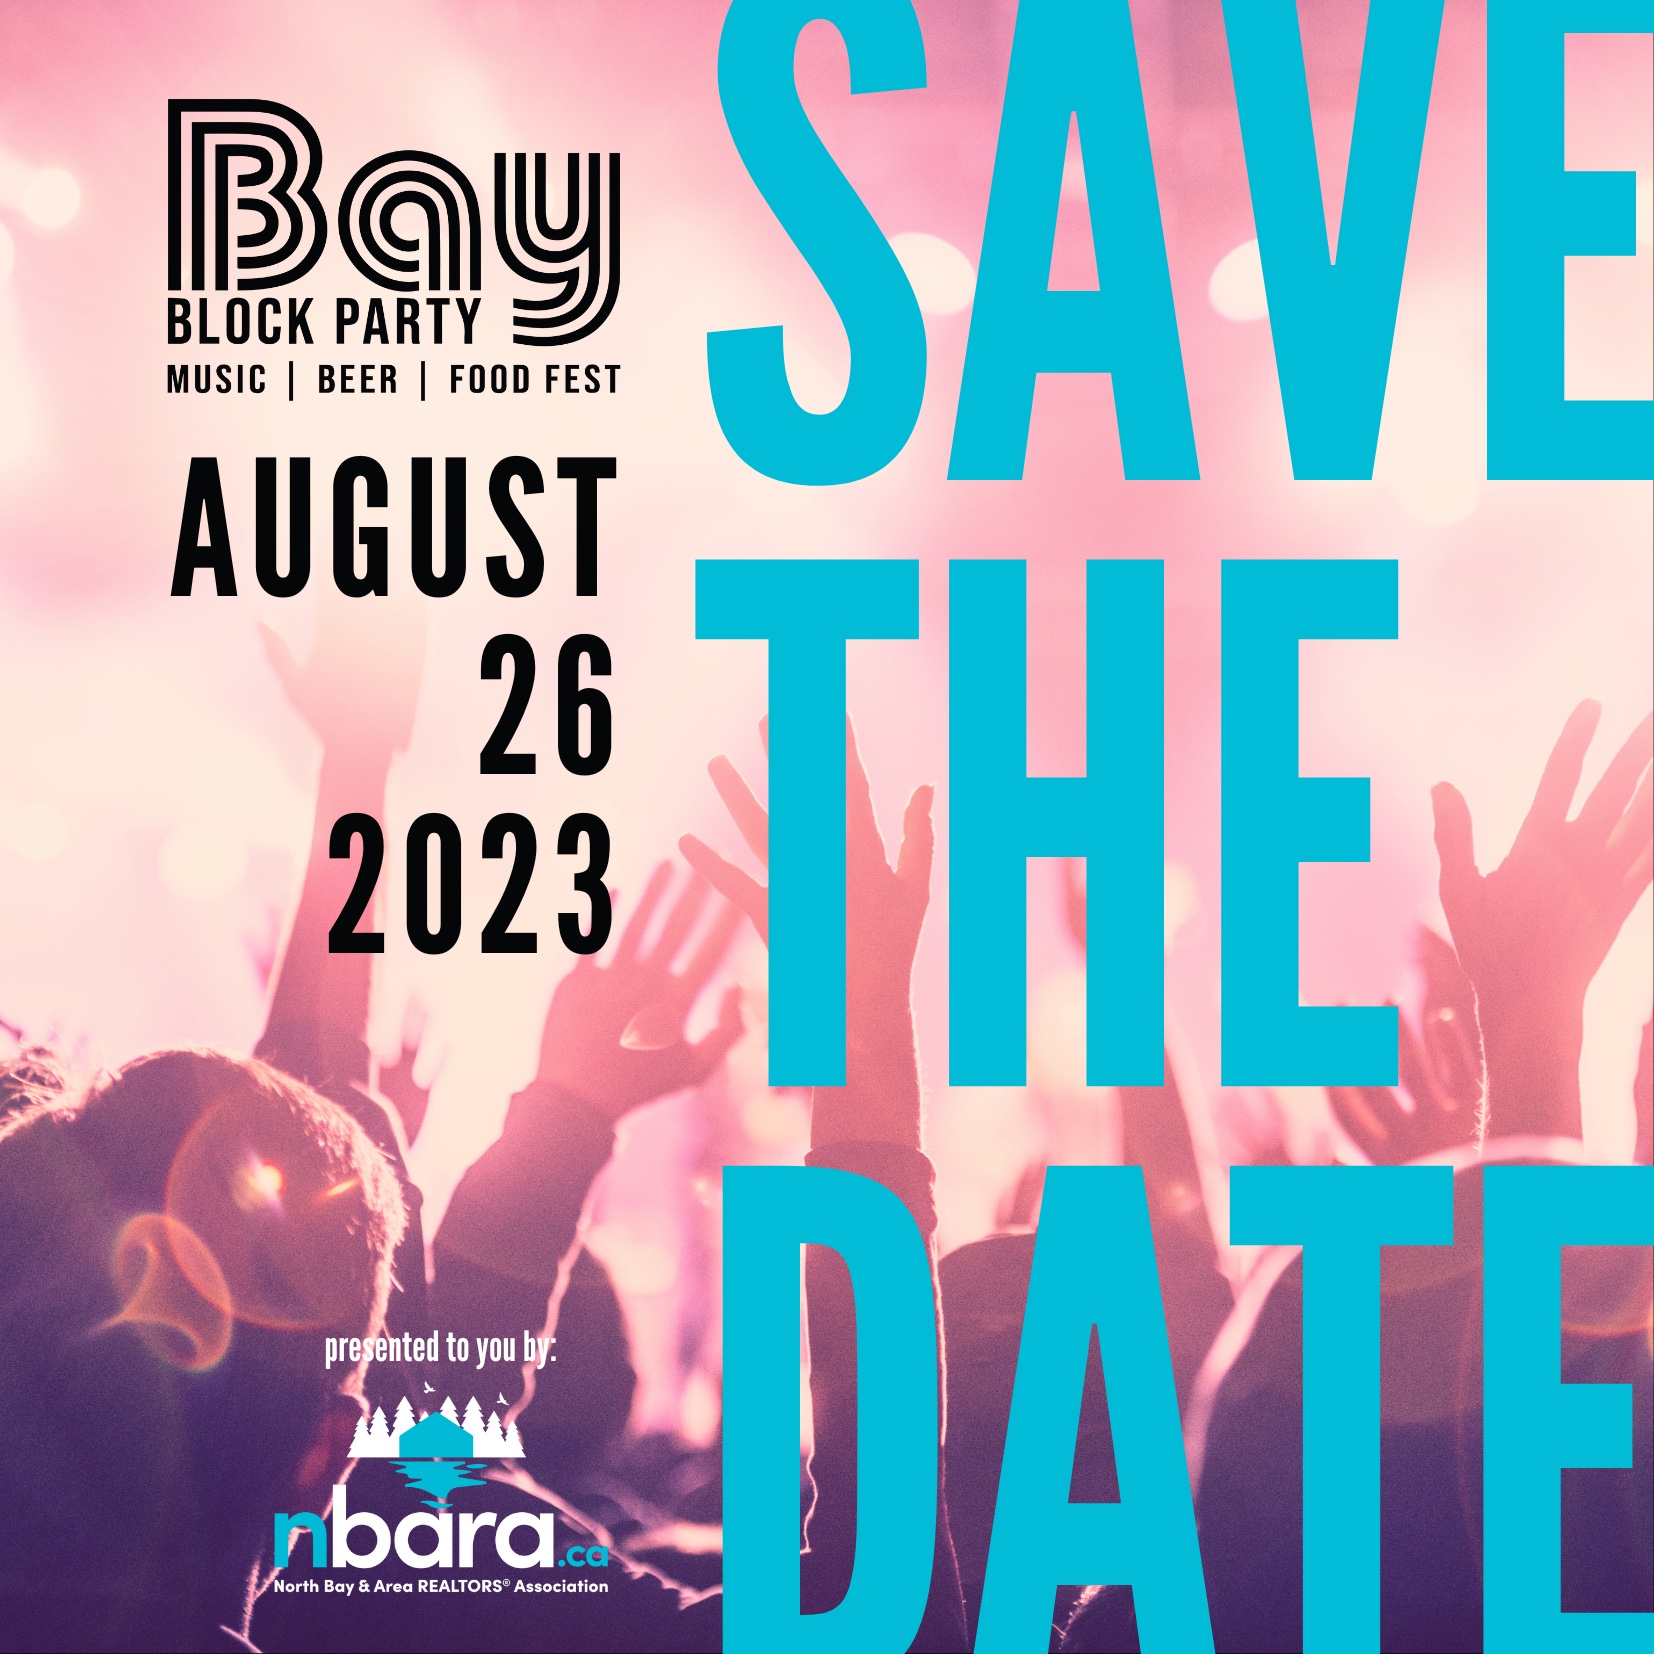 BBP Save the Date.jpg